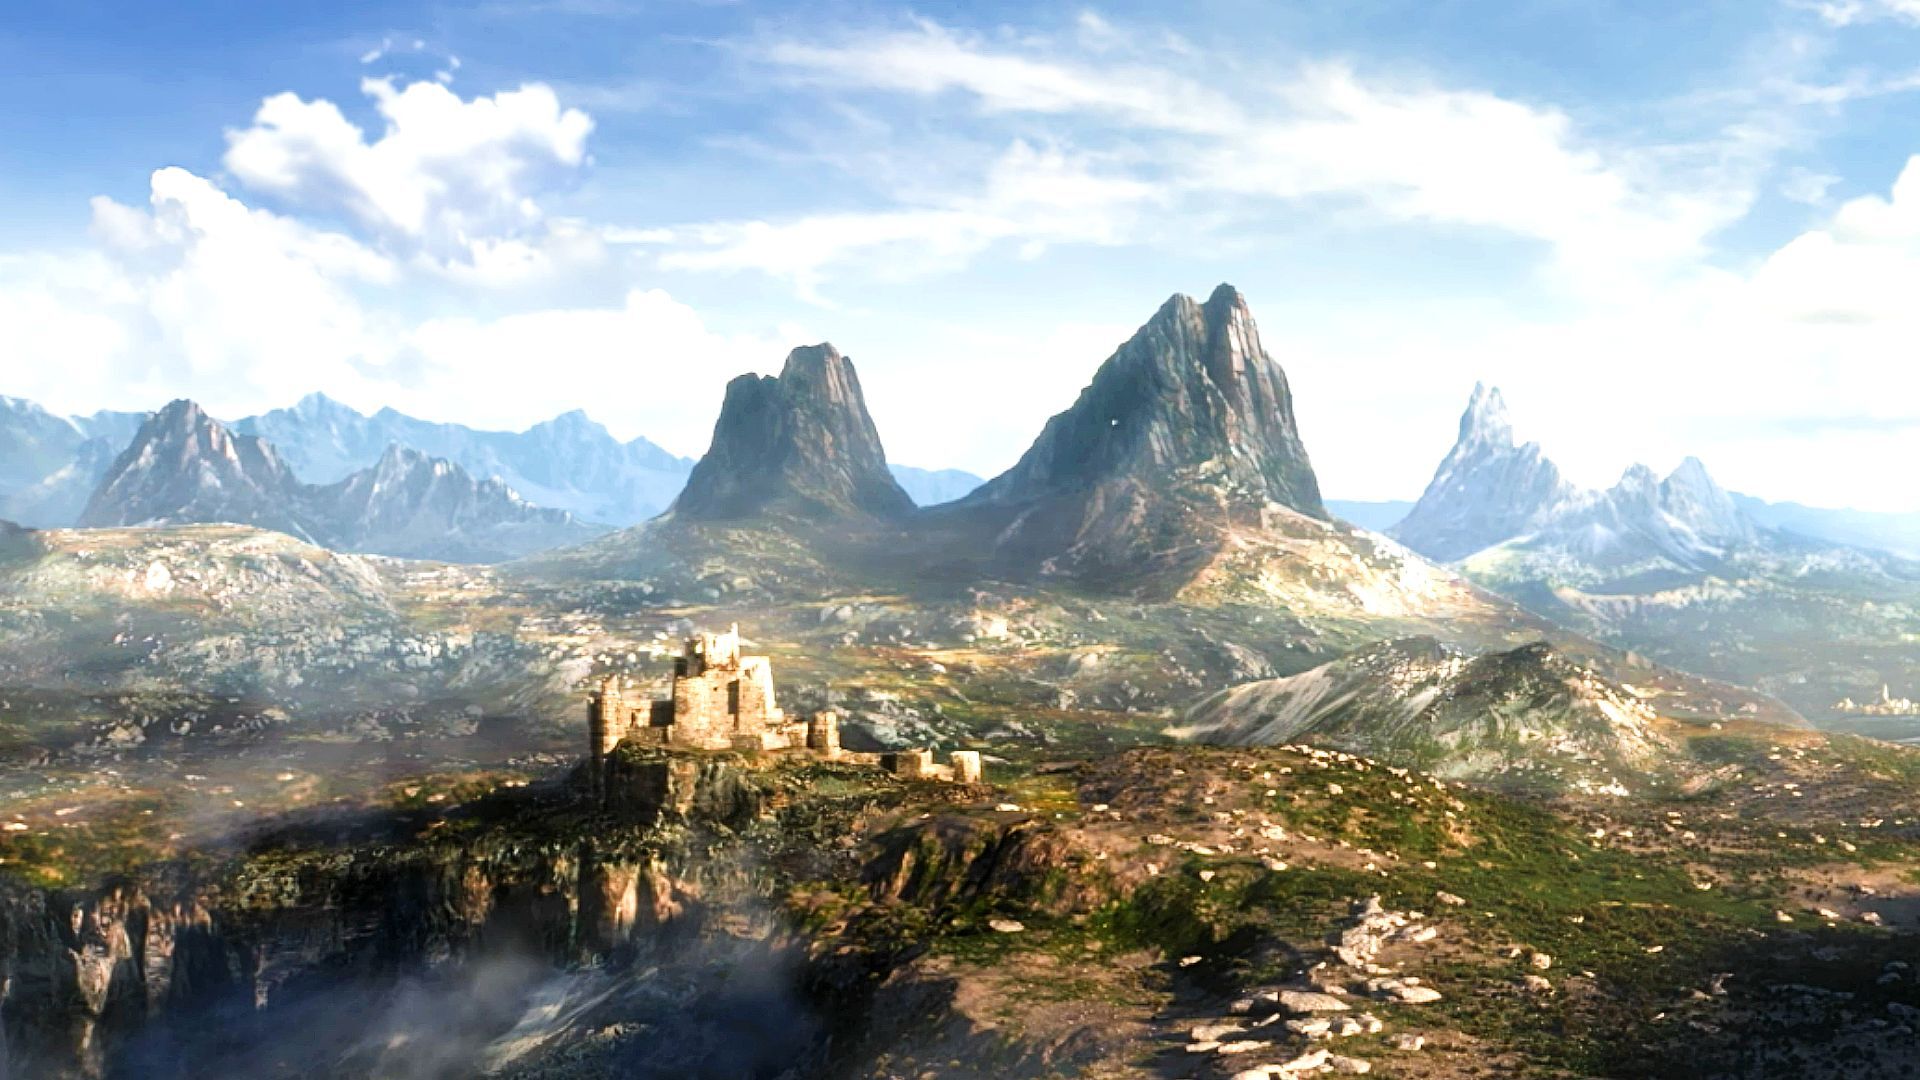 Elder Scrolls 6 revealed early due to fans' “pitchforks and torches”